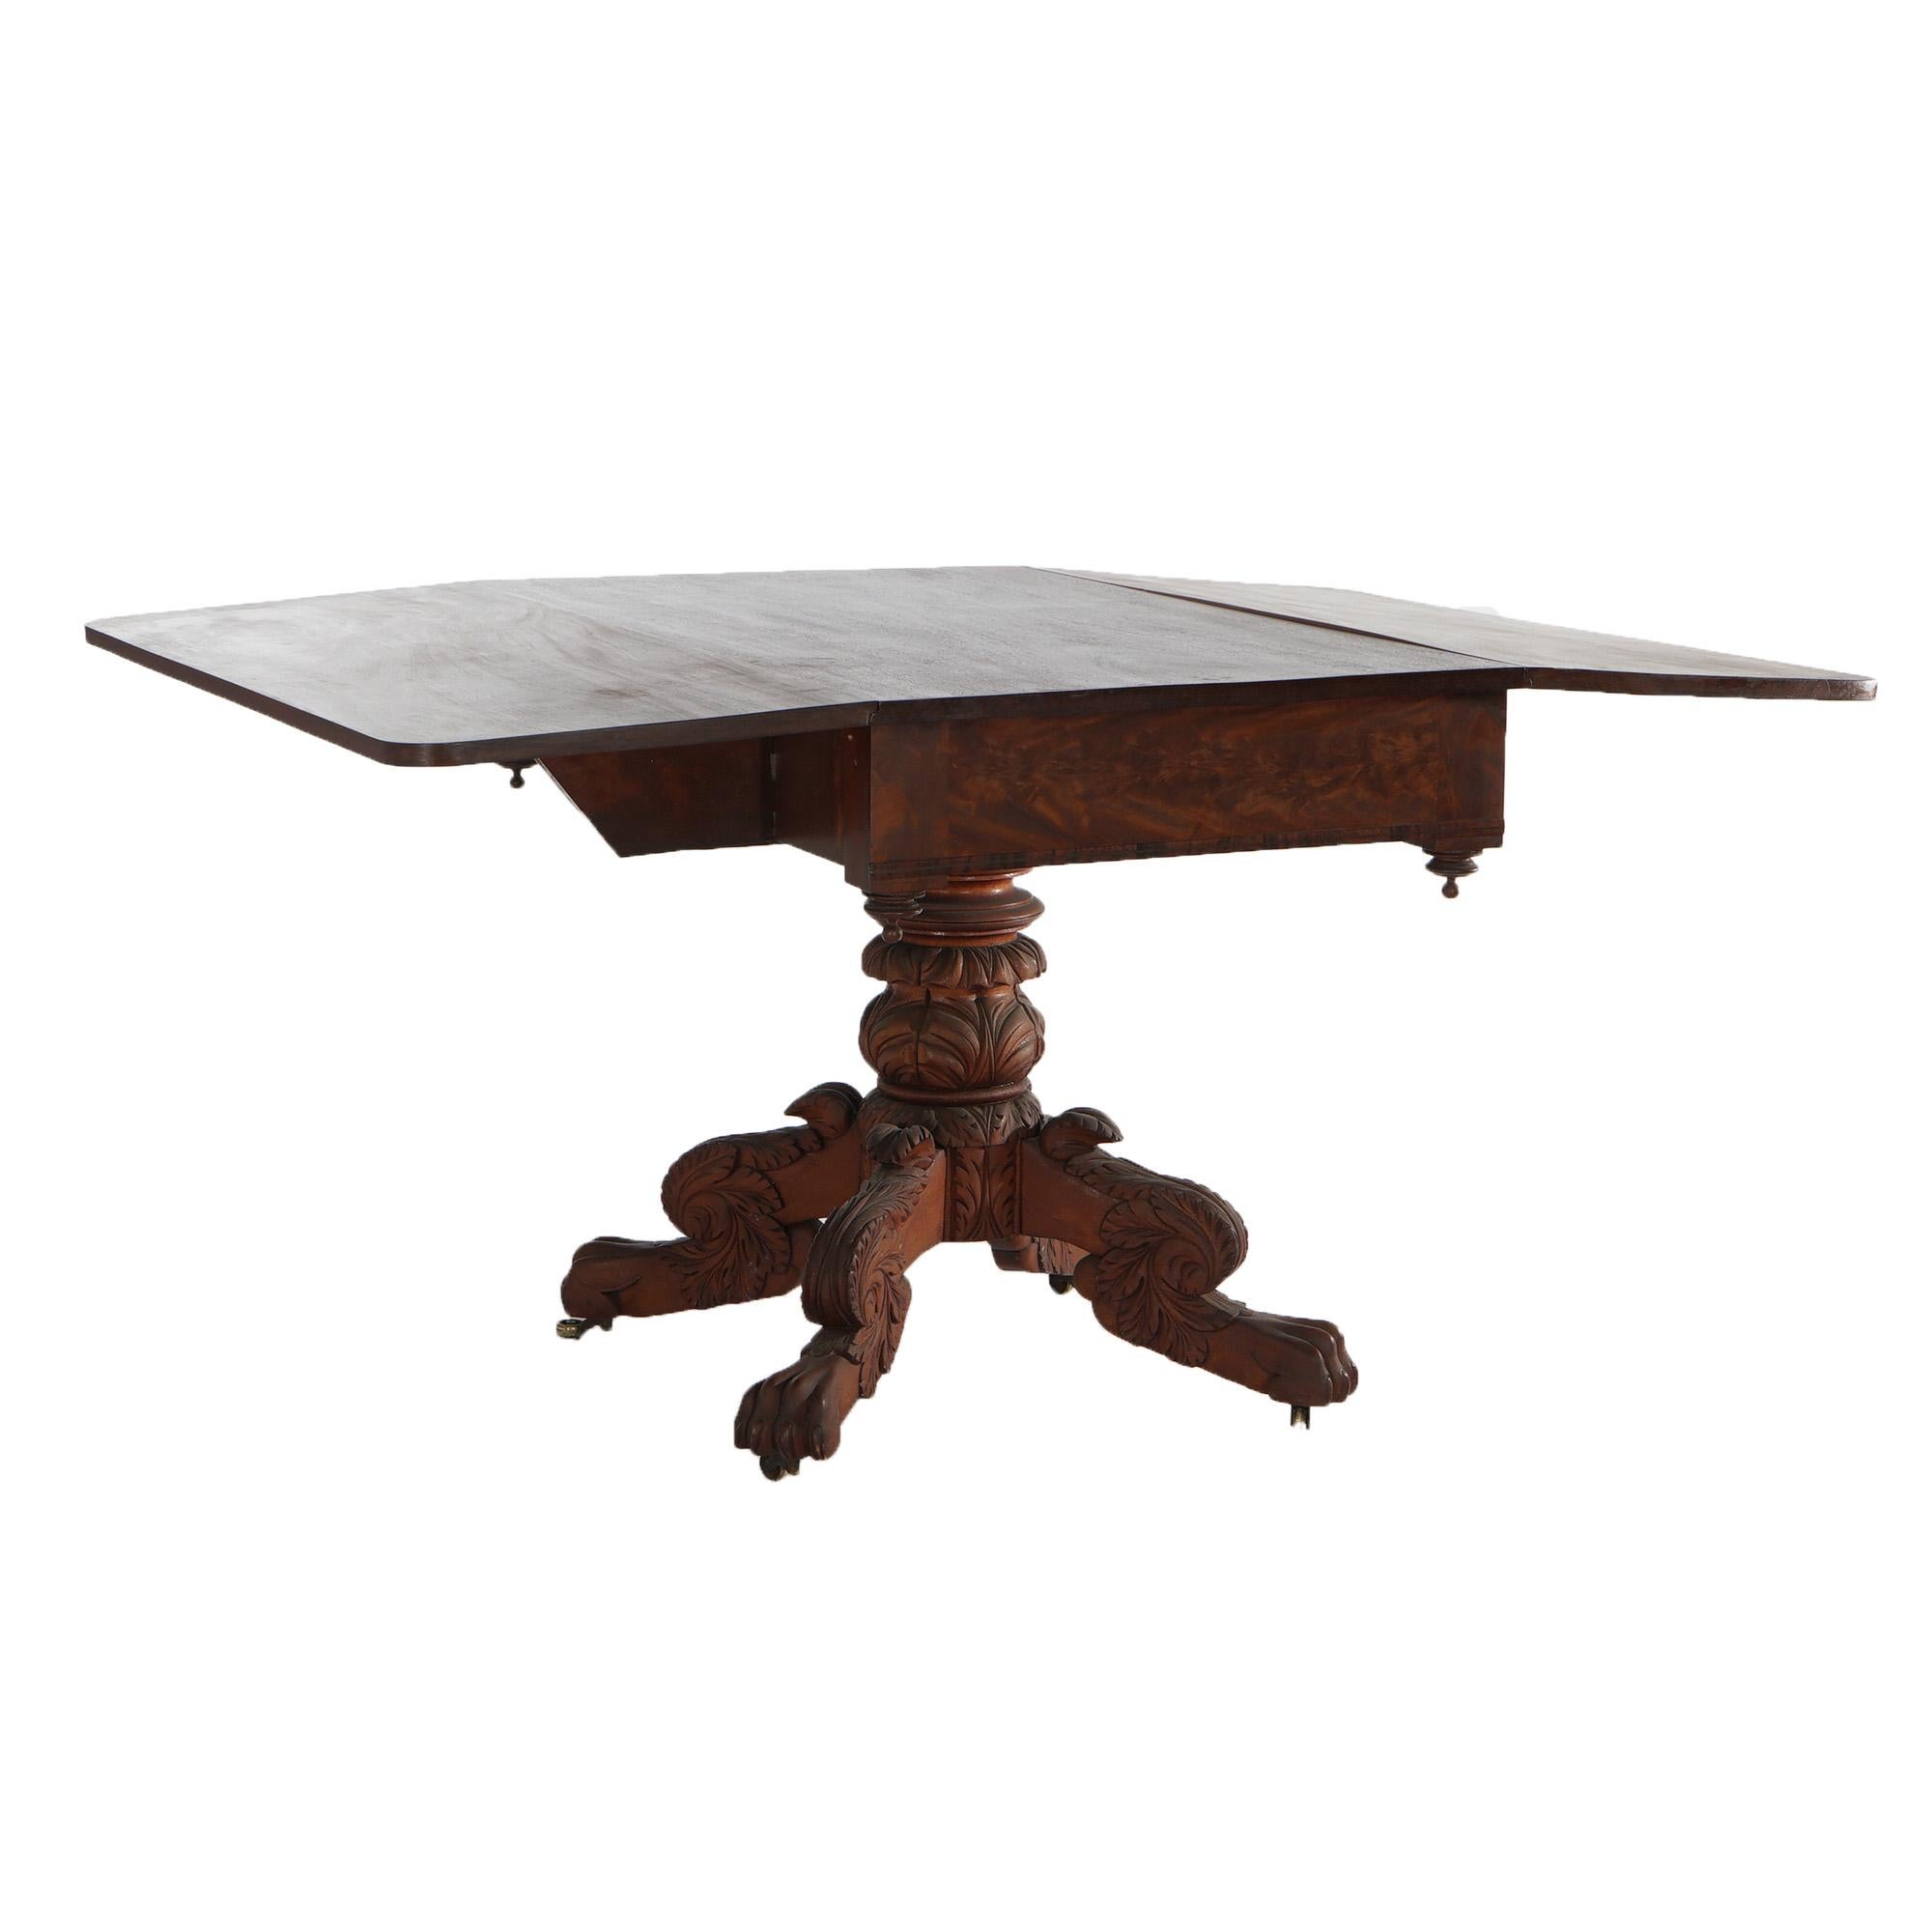 Antique Neoclassical American Empire Carved Flame Mahogany Drop Leaf Table c1880 For Sale 5